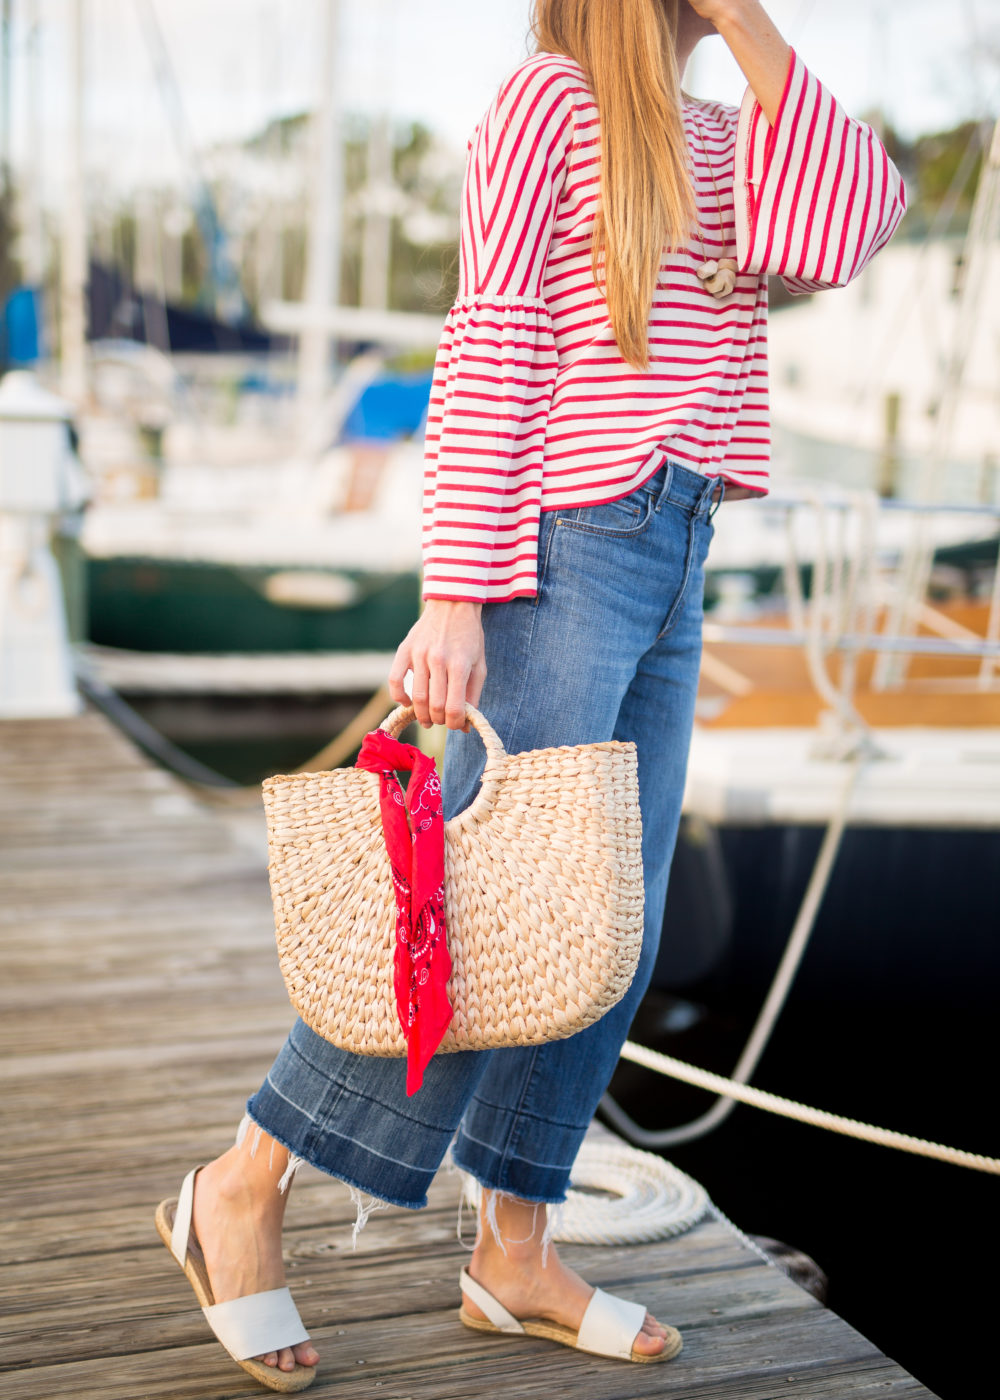 A Classic Striped Look for Fall, Wearing Wide Leg Pants + Striped Top + Straw Bag with Bandana | Sunshine Style